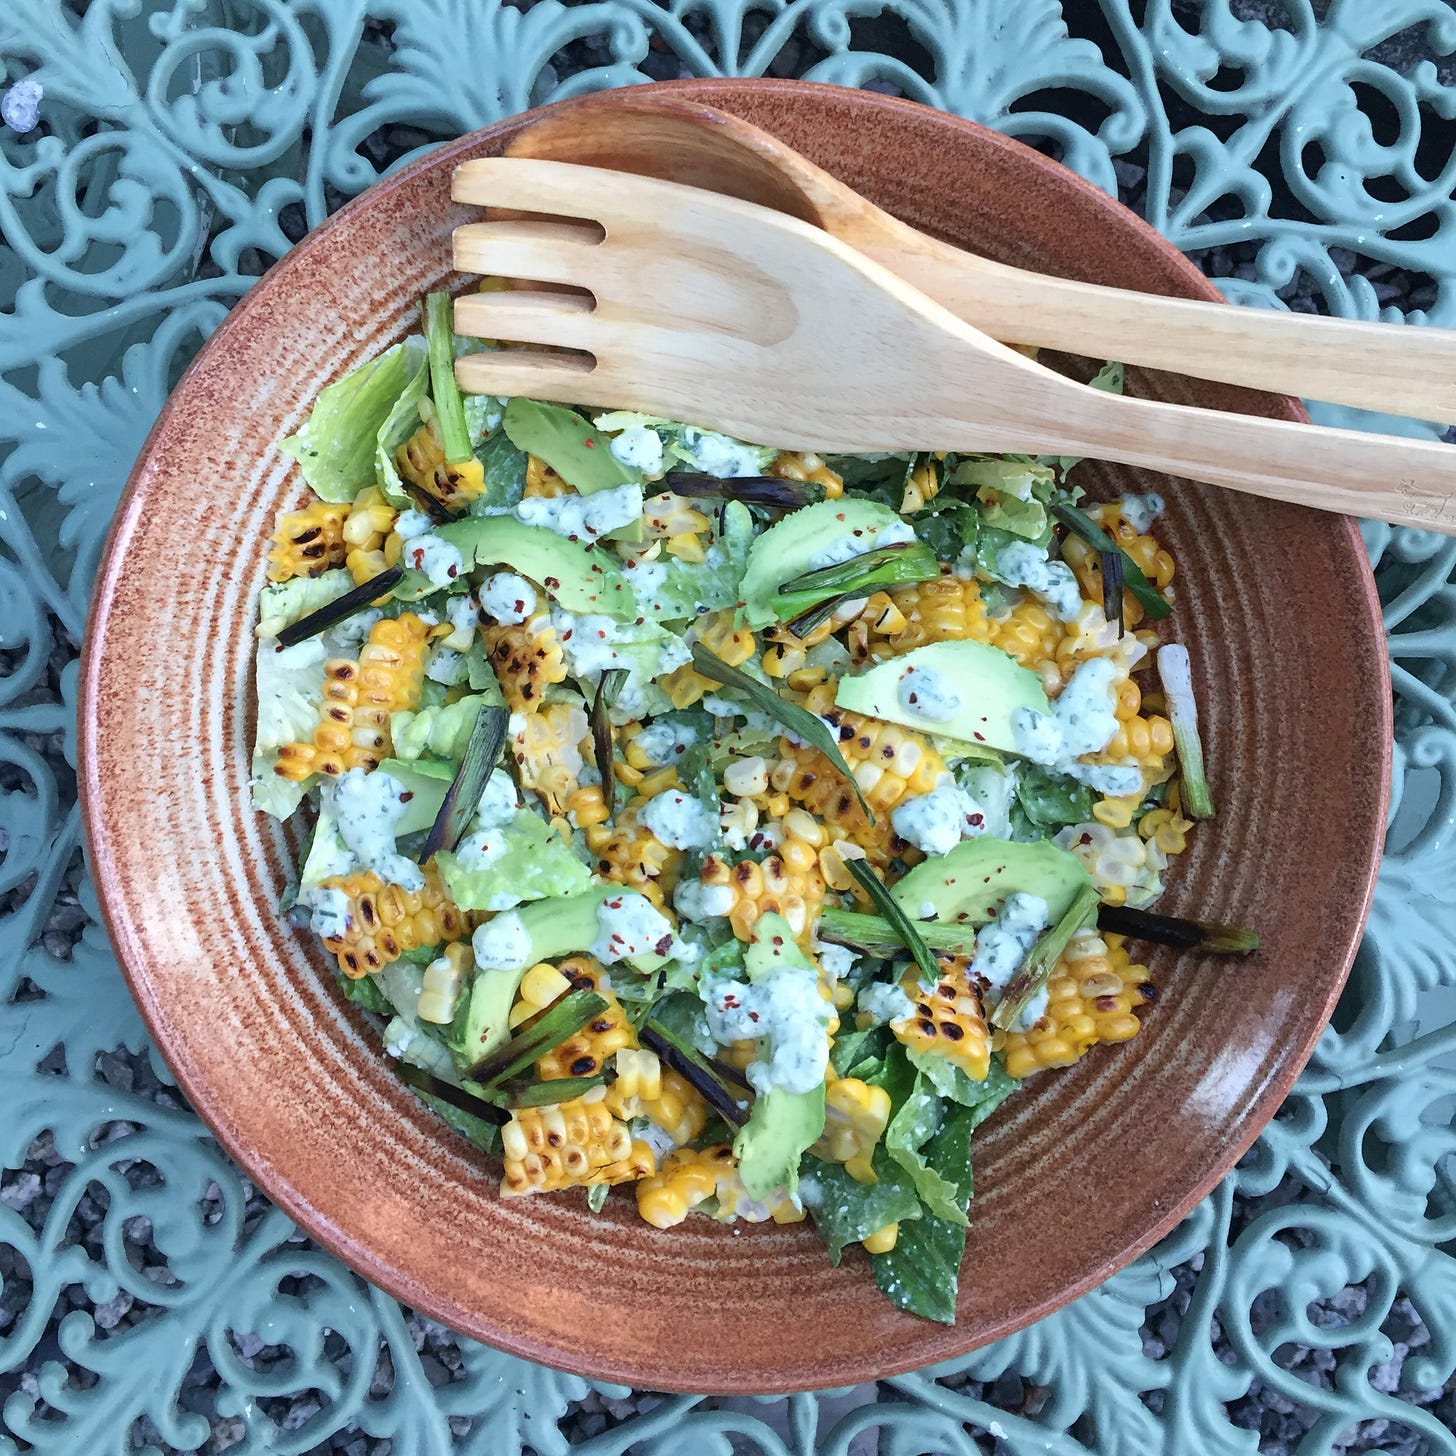 from above, a rustic ceramic bowl filled with salad greens, slices of avocado, bits of grilled green onion, and large pieces of charred corn sliced off the cob. A creamy dressing is drizzled over the top. A wooden serving fork and spoon sit near the top of the bowl.